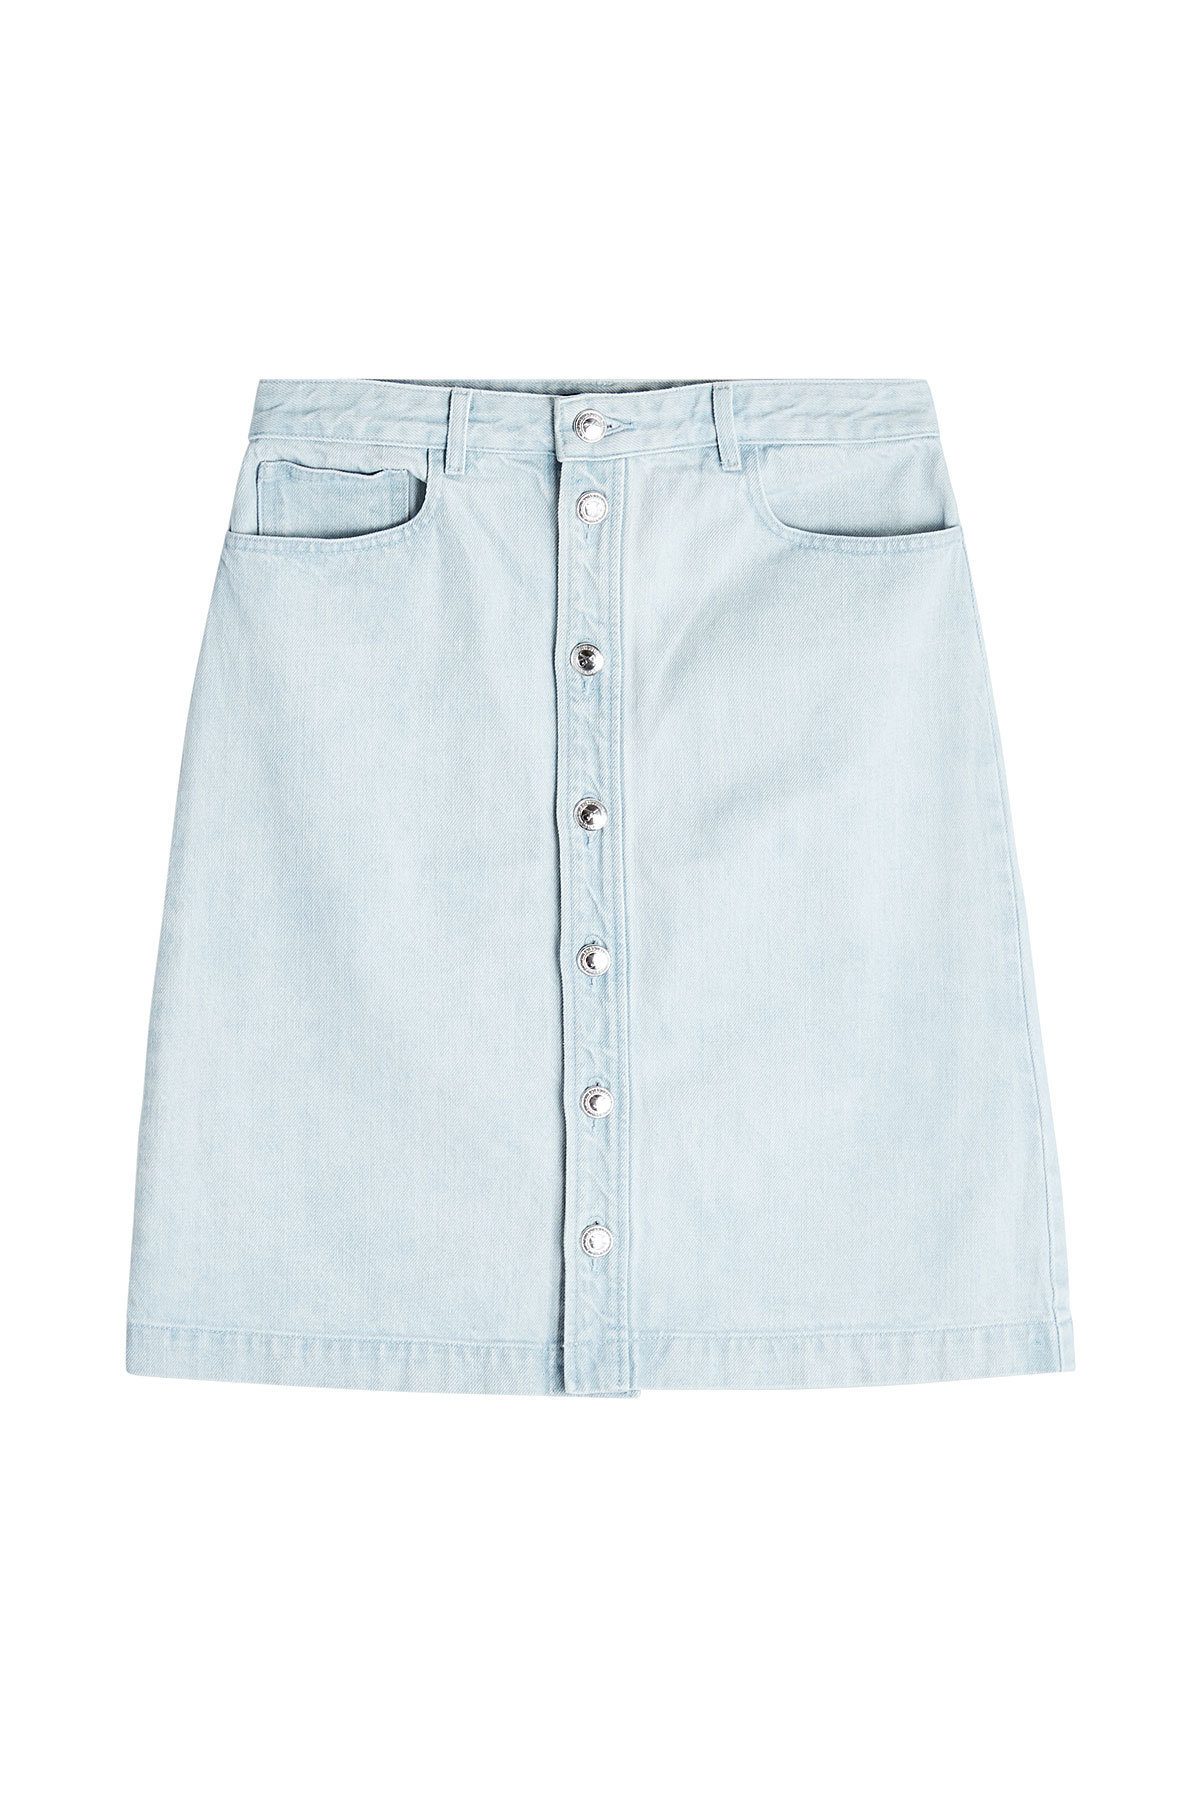 A.P.C. - Therese Denim Skirt